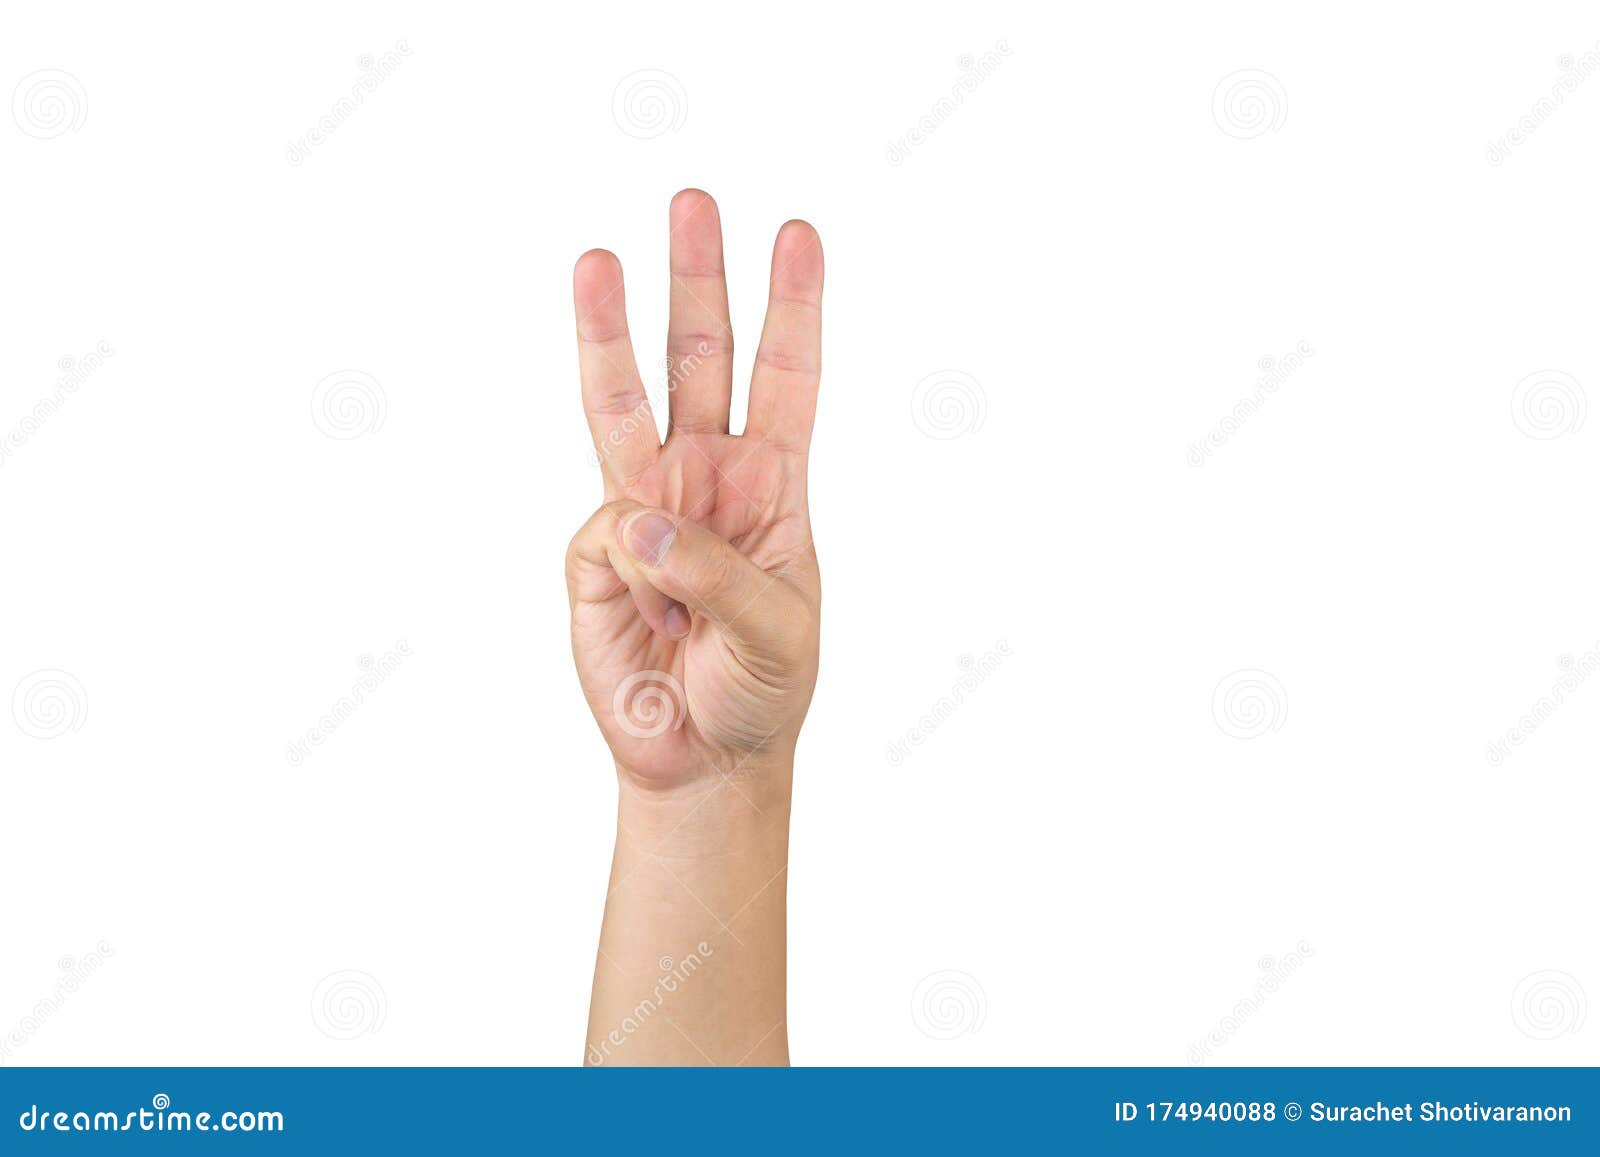 140 Isolated Hand Shows Number Three Stock Photos - Free & Royalty